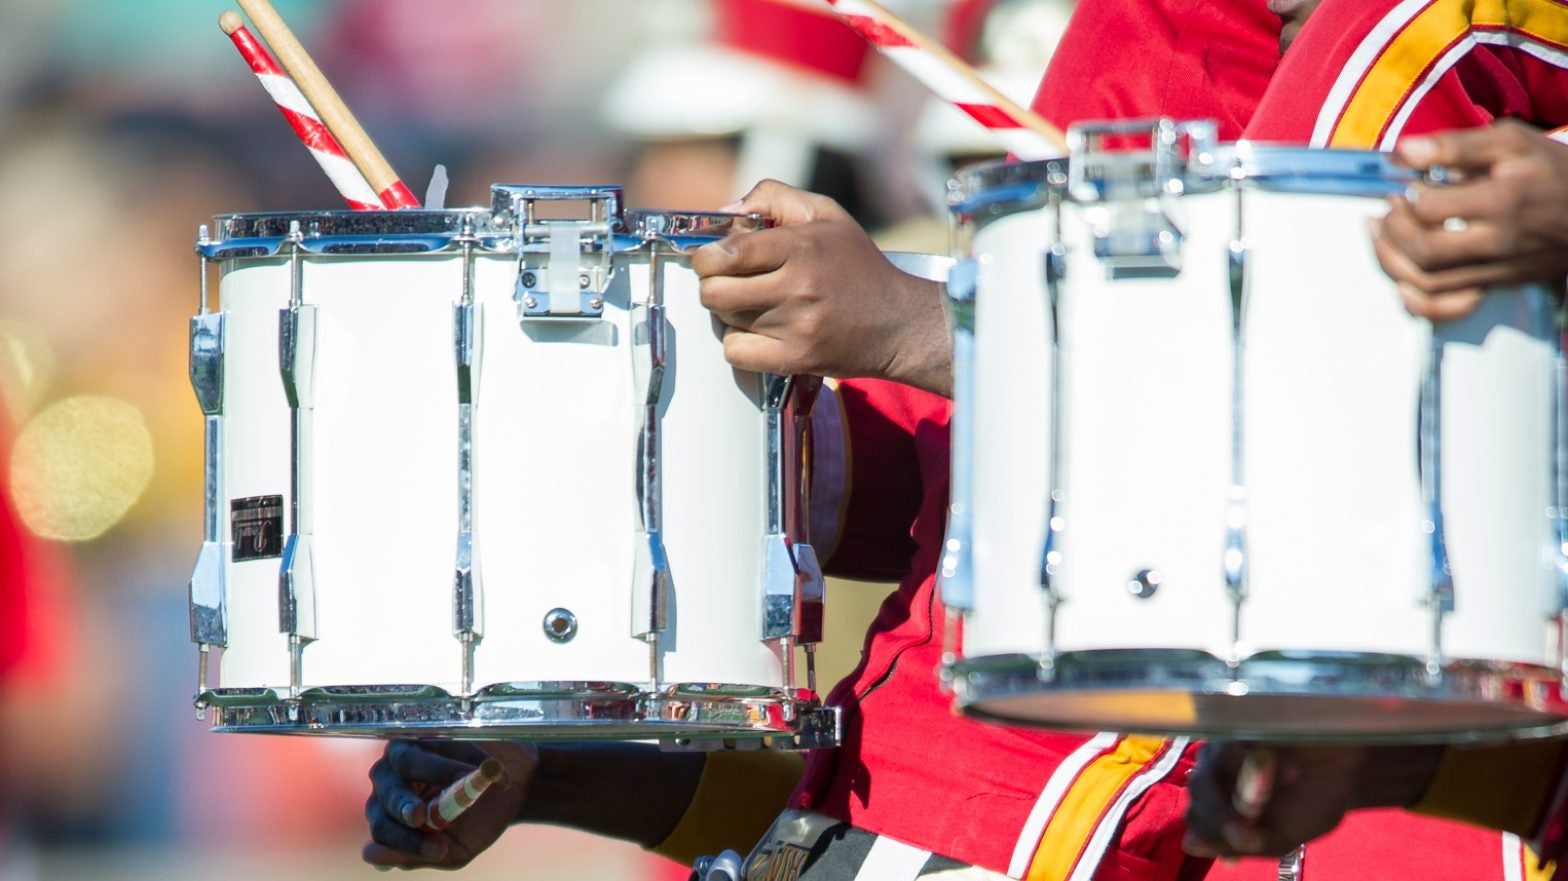 Tuskegee Marching Band Threatens Boycott, Claims They Feel 'Exploited'